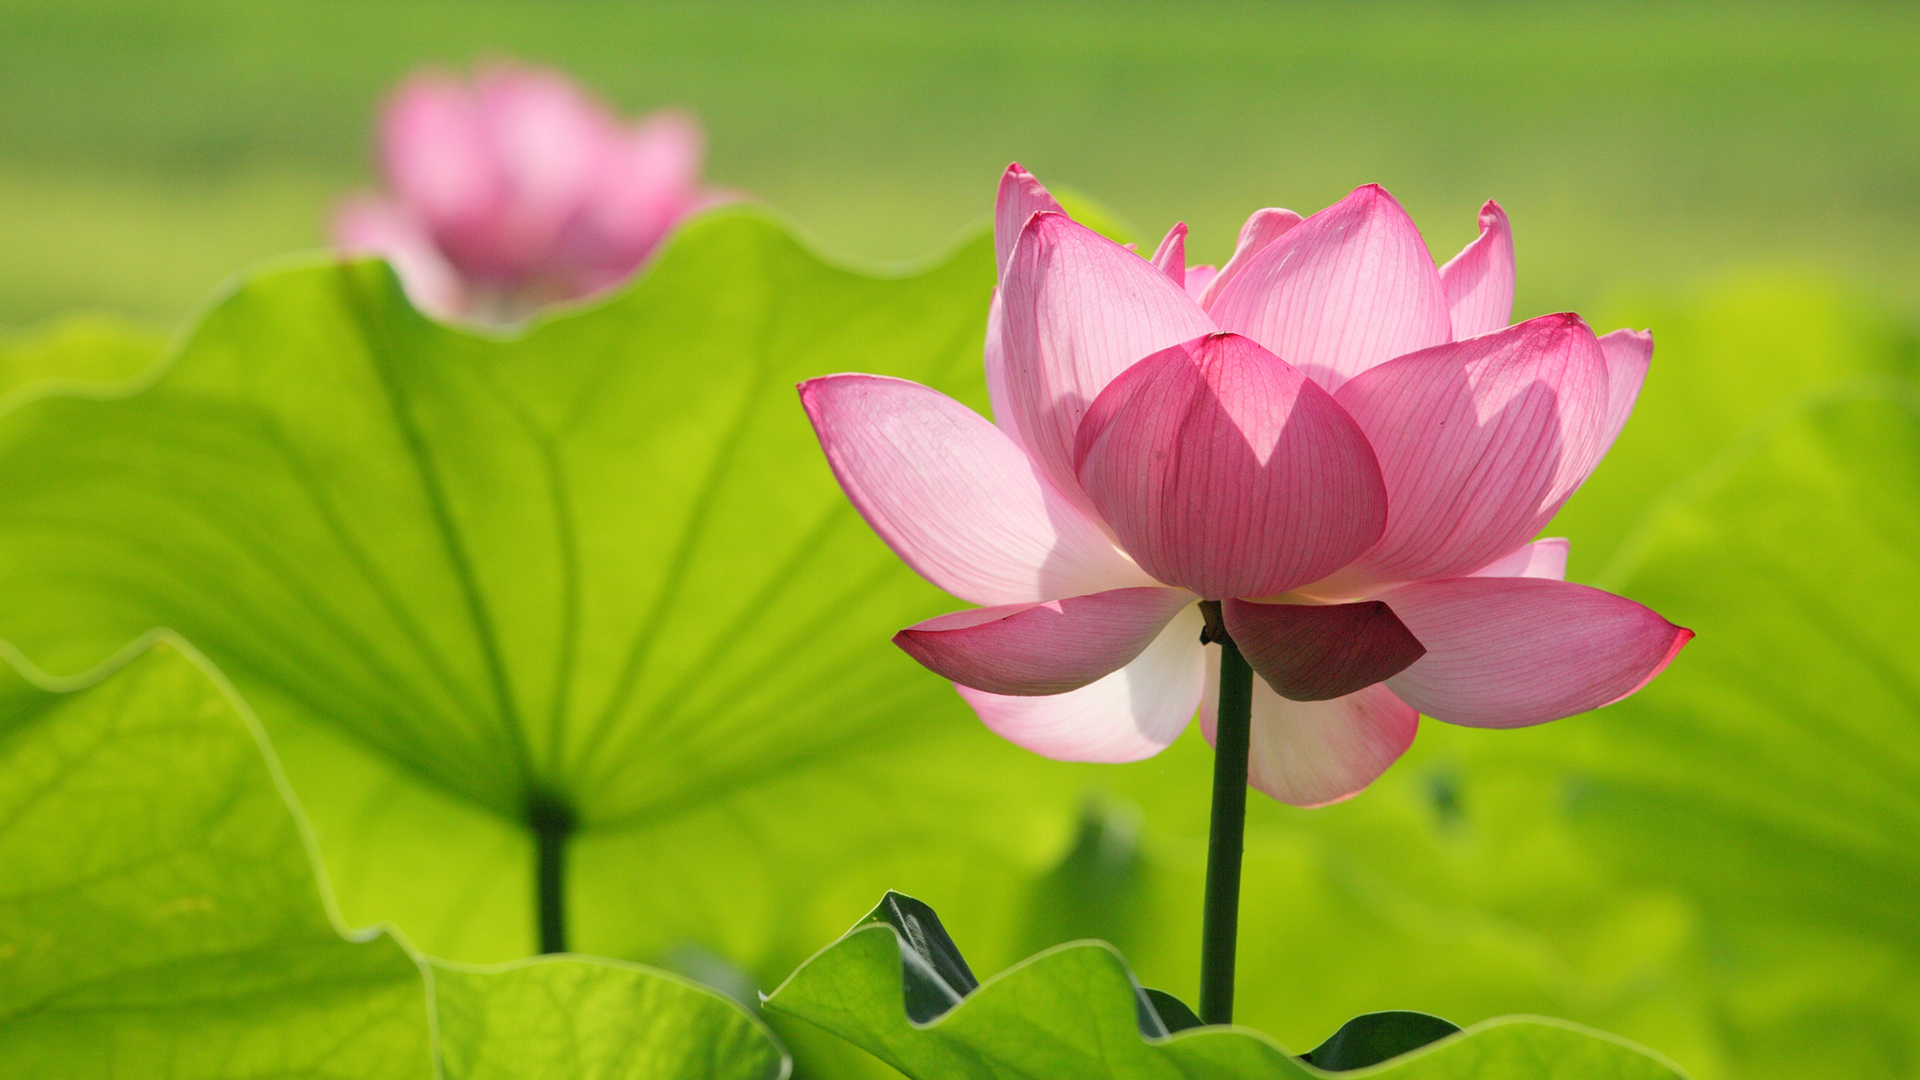 HD Wallpaper with Pink Lotus Flower in Green Background - HD Wallpapers ...